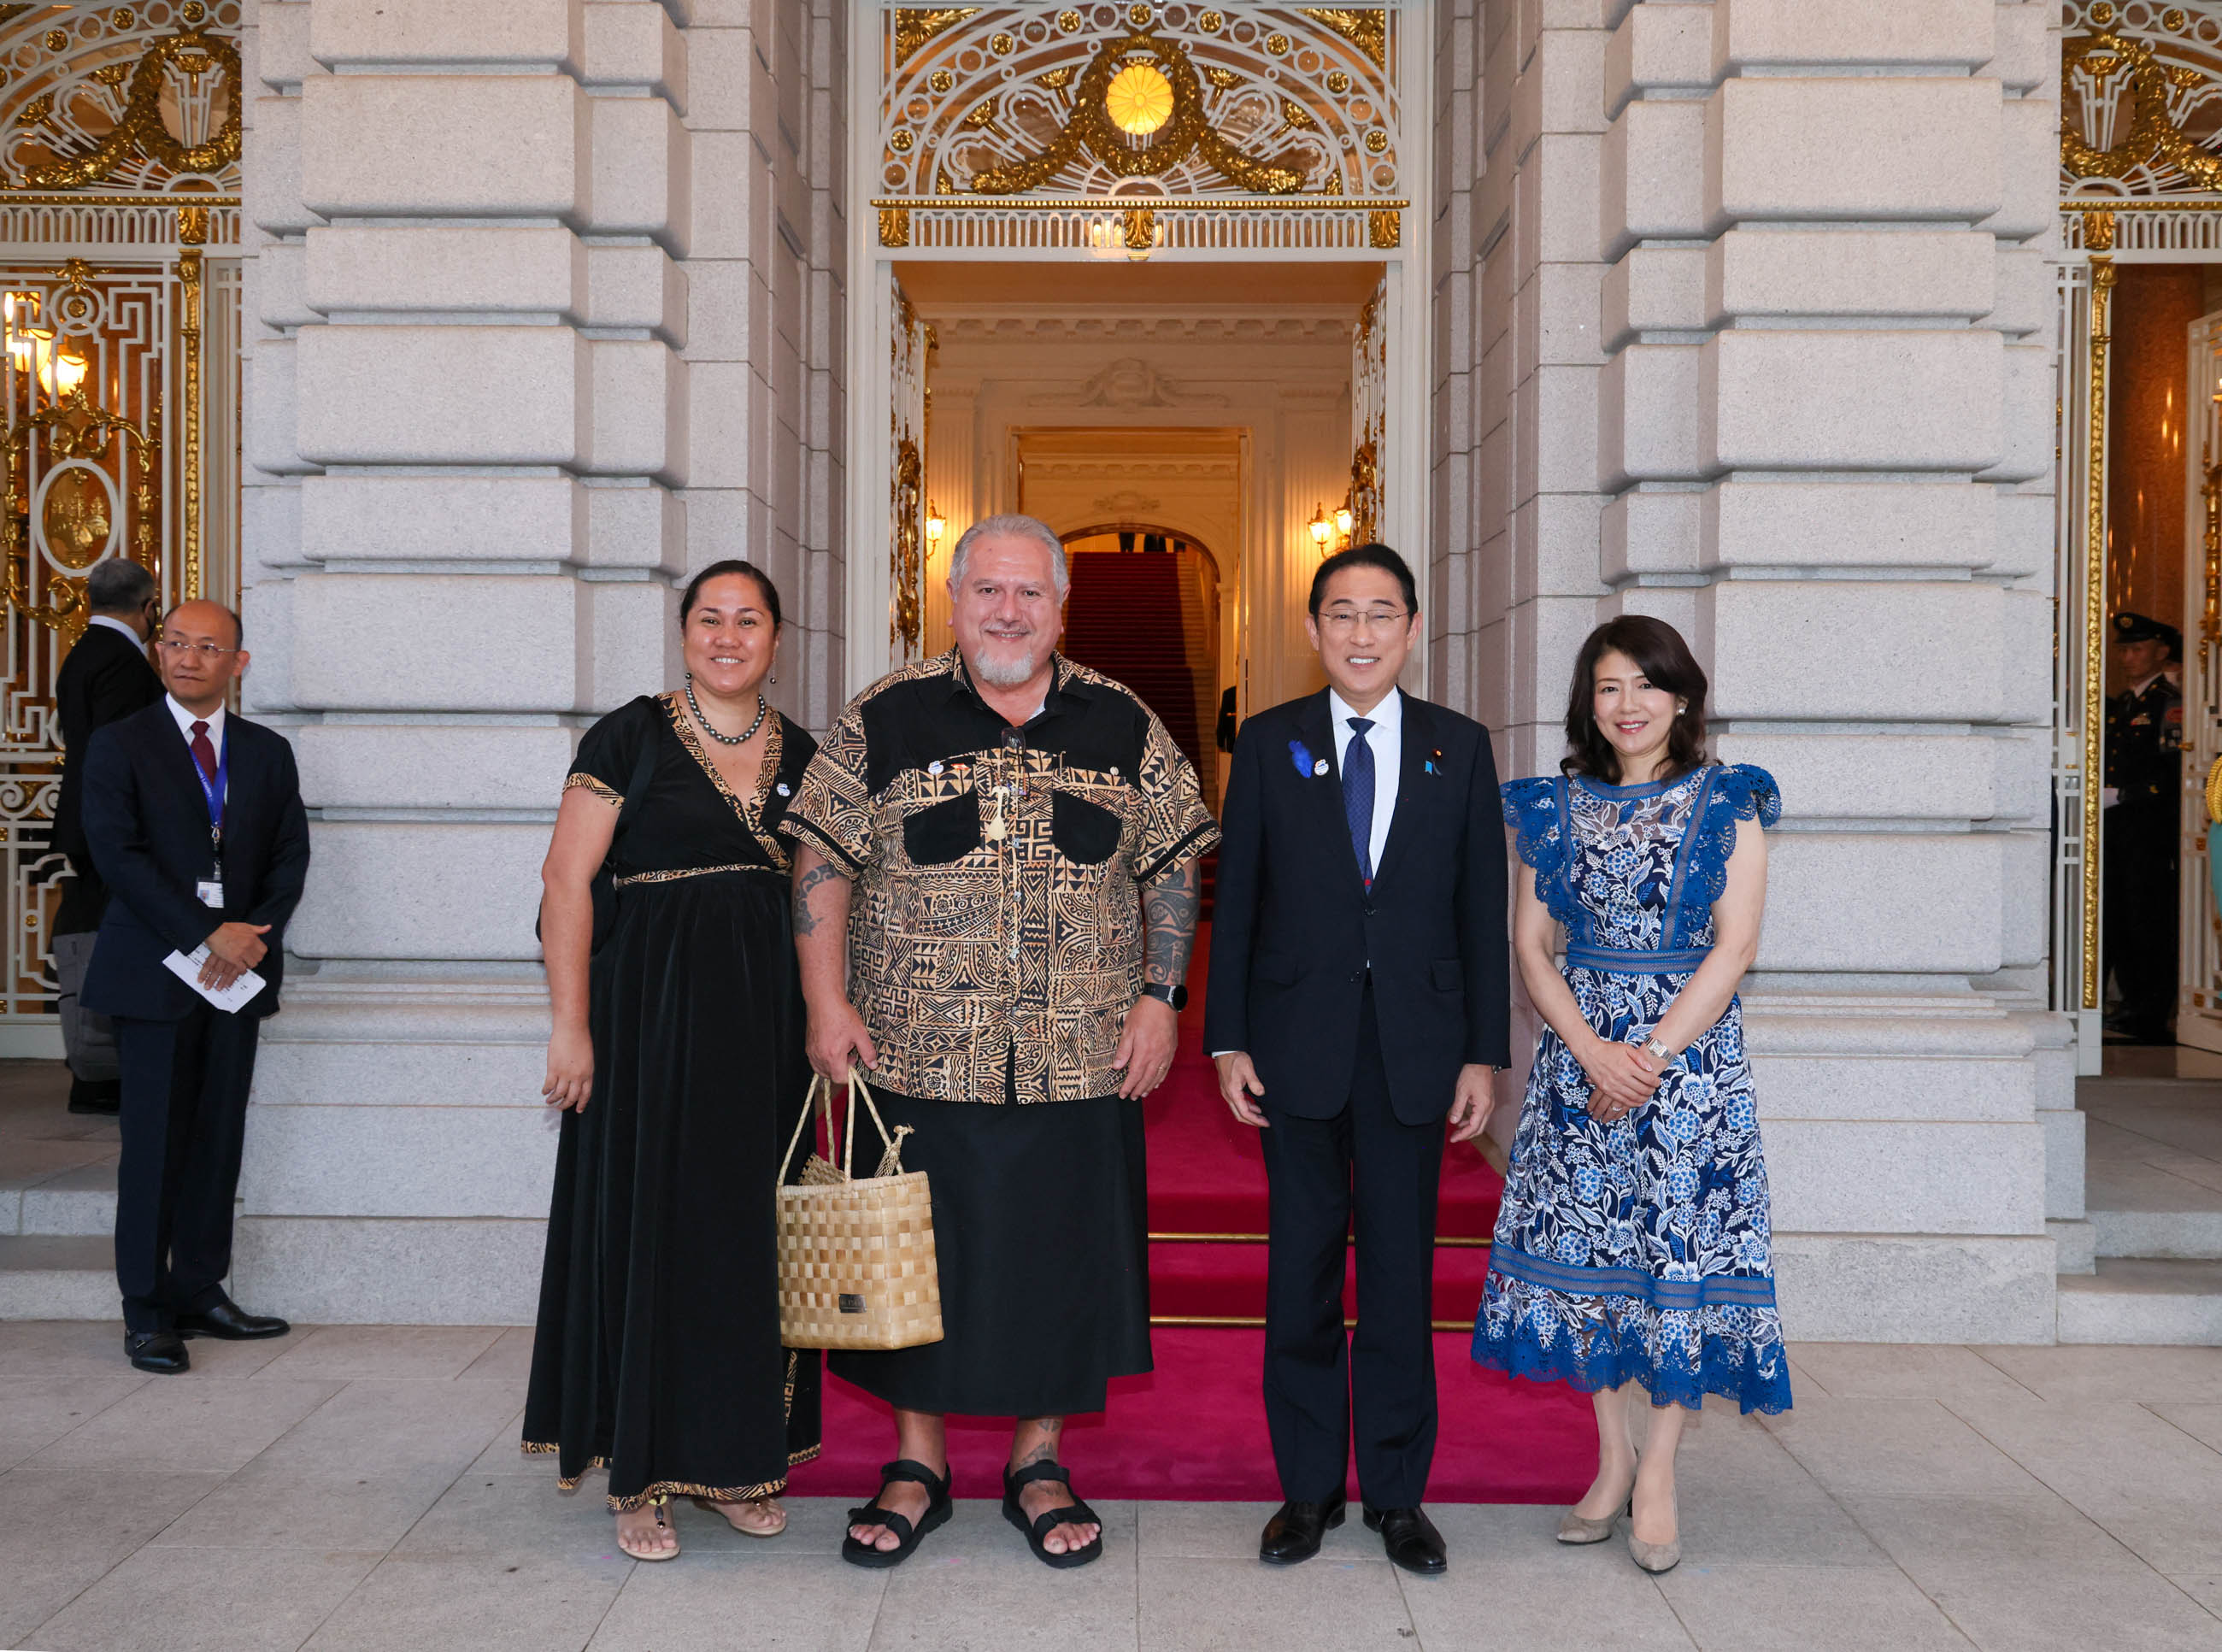 Prime Minister Kishida welcoming H.E. Mr. Moetai BROTHERSON, President of French Polynesia and Mrs. BROTHERSON 